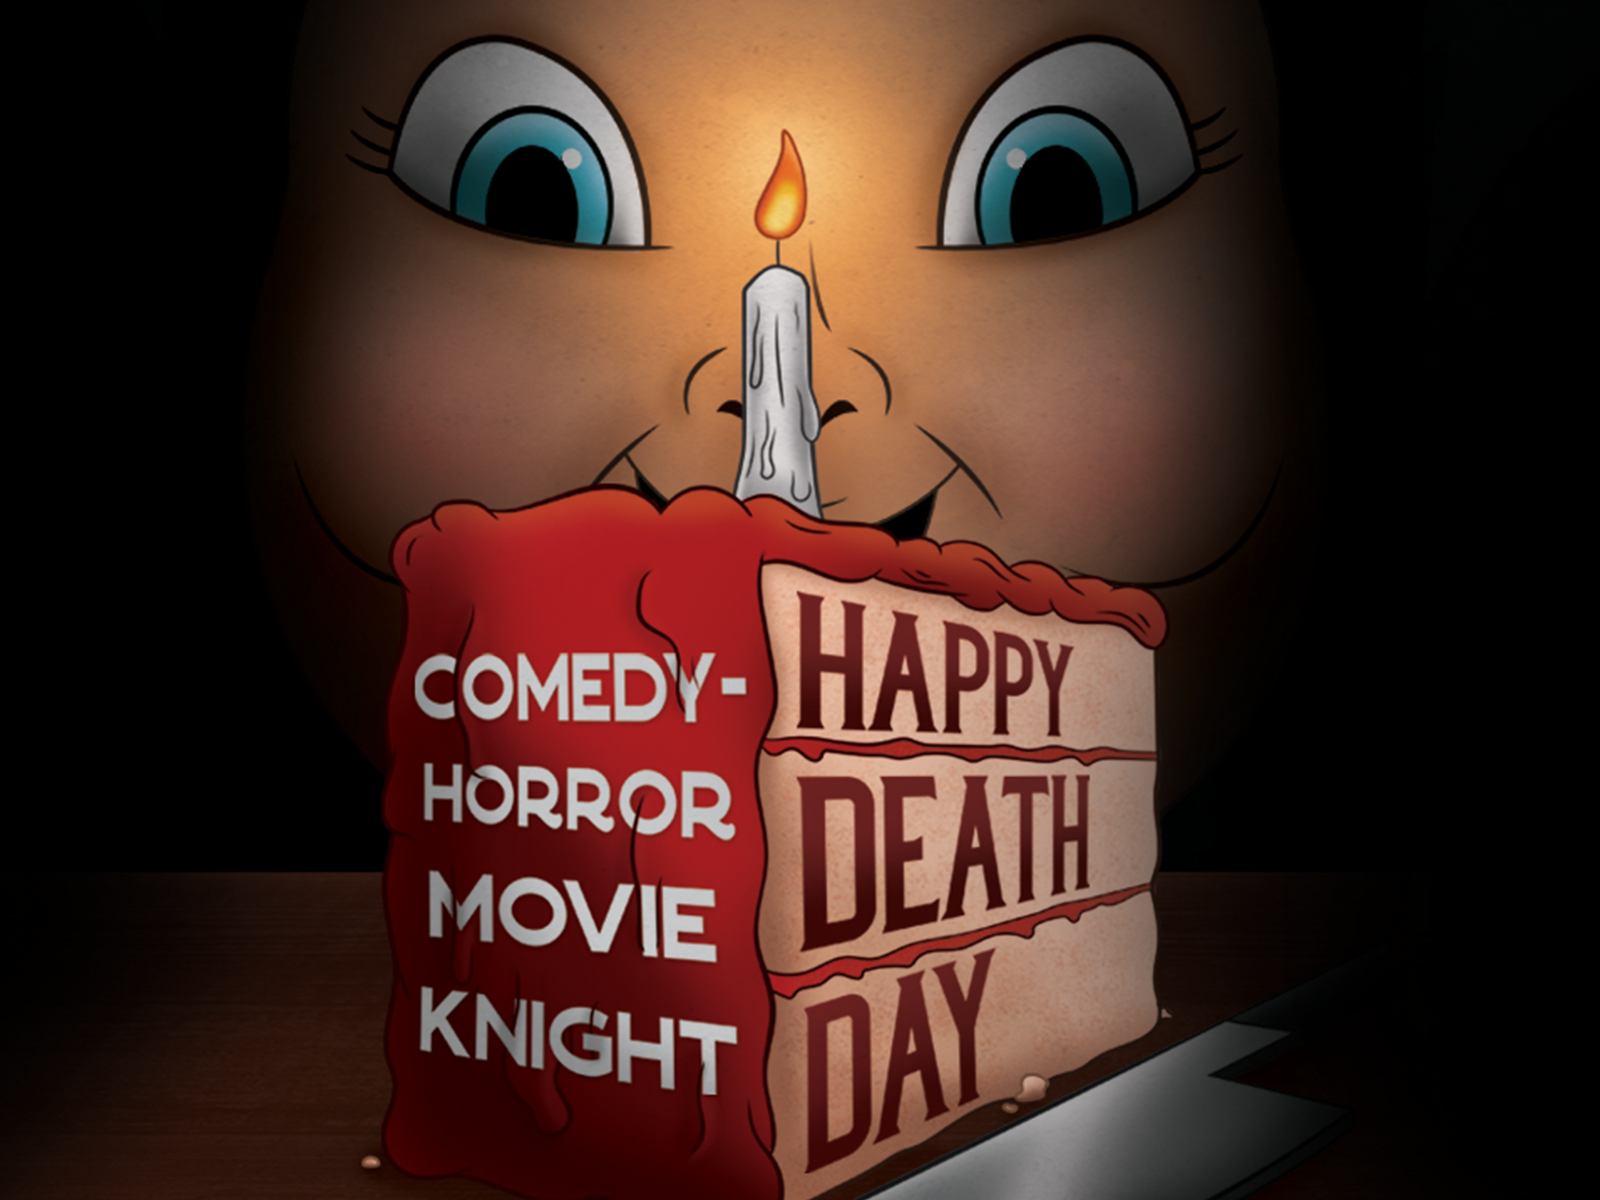 Happy Death Day Poster by Ava Buric on Dribbble